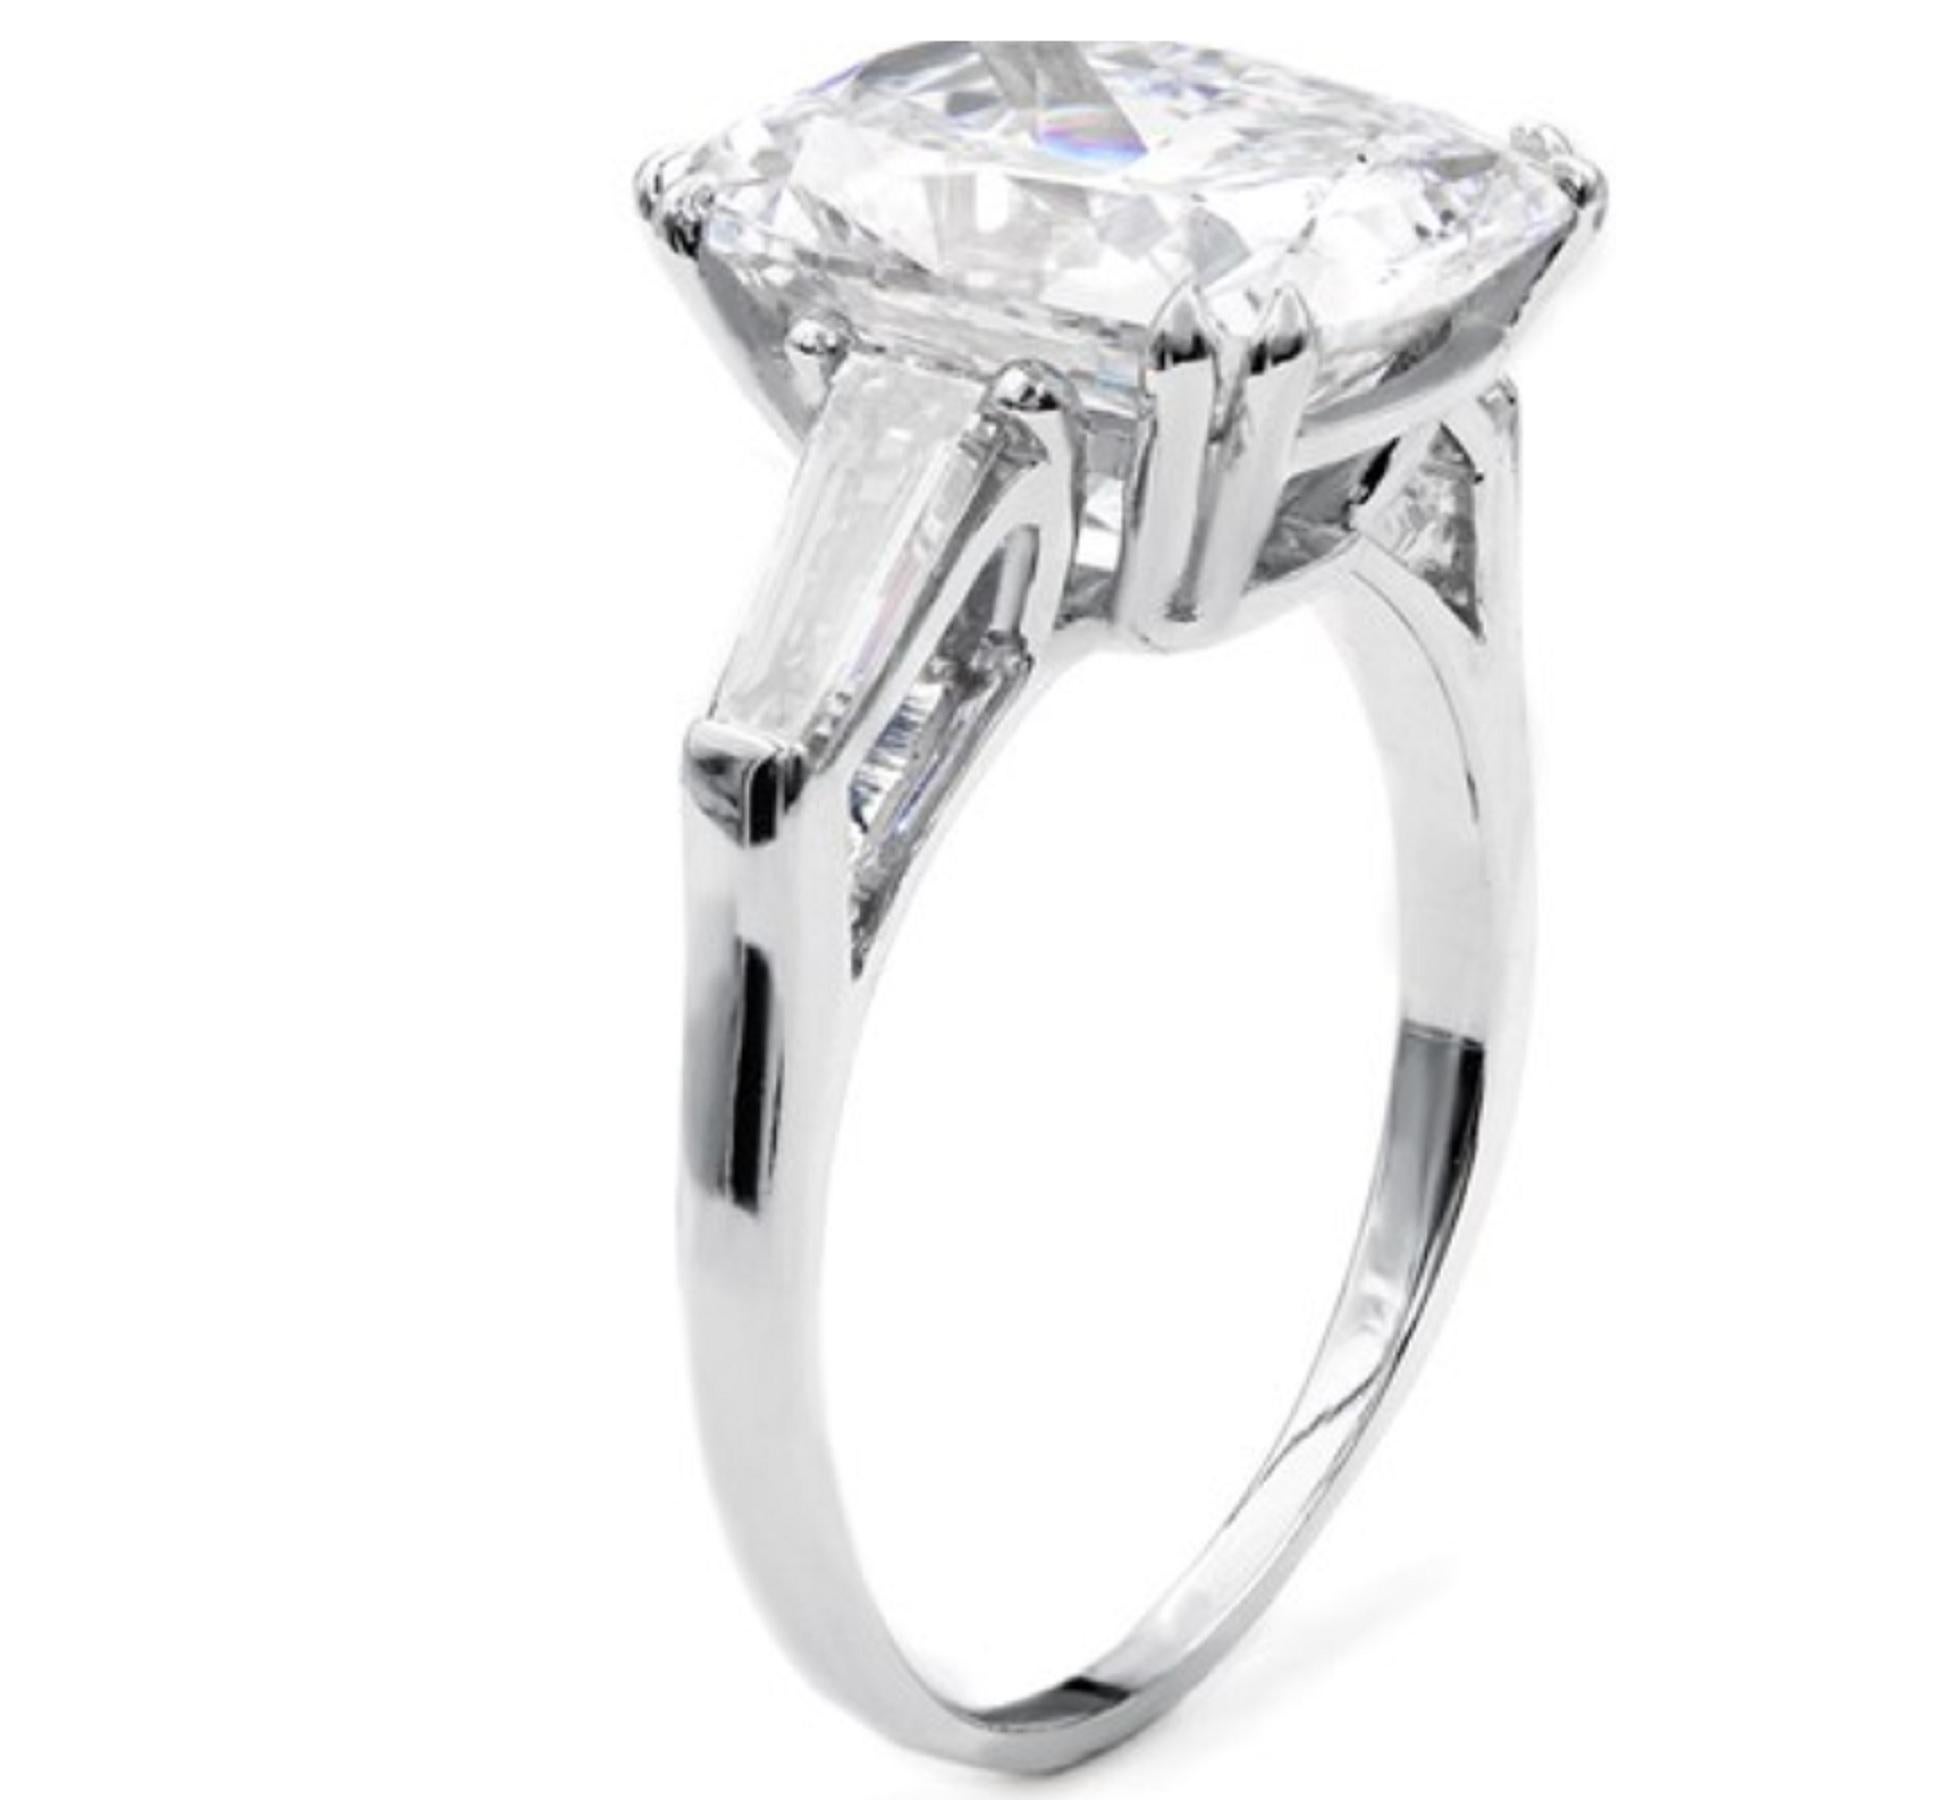 An exquisite brilliant cushion diamond with two tapered baguette diamonds and is mounted in solid platinum the total carat amount is 9 carats
the main stone weight is 9 carats
has D Color



